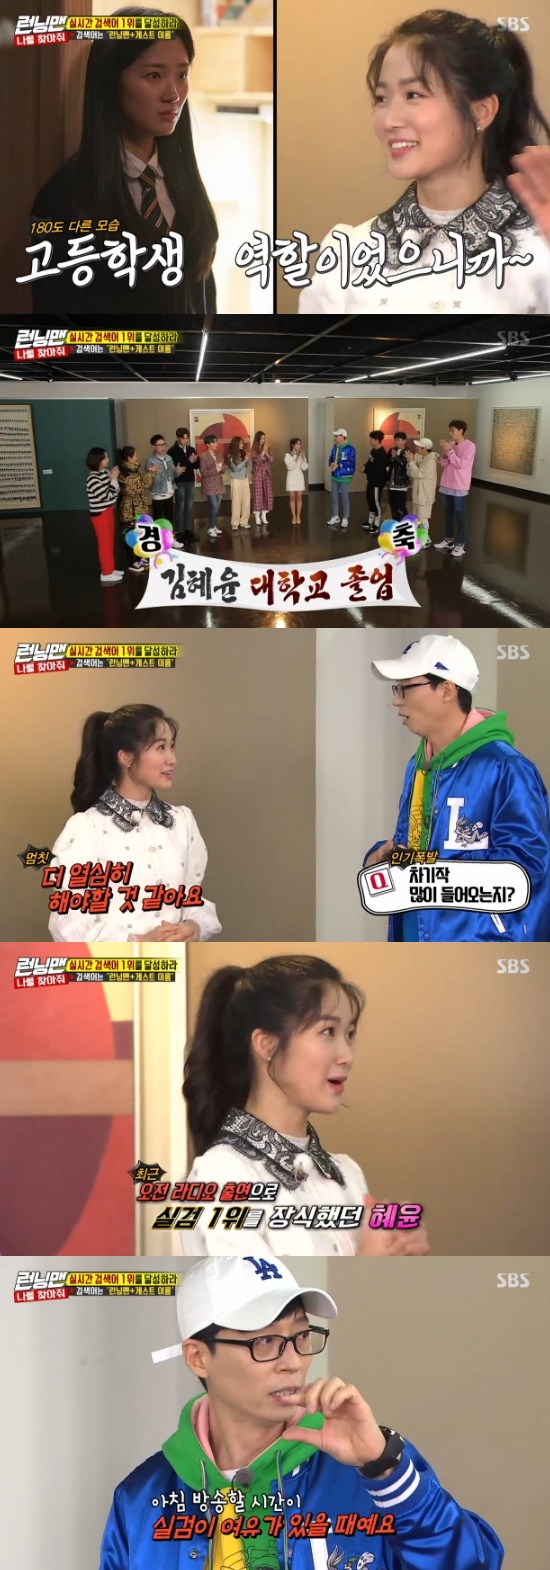 Running Man Yoo Jae-Suk laughed at Kim Hye-yoon by blowing the opening remarks.On the 21st broadcast SBS Good Sunday - Running Man, Kim Hye-yoon  and Hanboreum appeared.Kim Hye-yoon, who appeared on Skycastle on the day, appeared.When Yoo Jae-Suk asked, Are you too busy? Kim Hye-yoon said, I am graduating from college and living a white house.Yoo Jae-Suk asked, Im going to come in a lot of next works, but Kim Hye-yoon laughed, saying, I think I should work hard.Kim Hye-yoon  said, I realized that I called Running Man, when asked if I realized popularity.Then Yoo Jae-Suk suddenly laughed at the vitriolic, saying, The world is fast and cools quickly.Also, Kim Hye-yoon appeared on the morning radio and said that he had been ranked number one in real-time search terms. Yoo Jae-Suk said, It is time for the morning broadcast to be available.The members booed, saying, Please take care of the guest. Yoo Jae-Suk added, Despite that, the first place is not easy.Kim Hye-yoon then chose Lee Kwang-soo and Yoo Jae-Suk as teams.Photo = SBS Broadcasting Screen